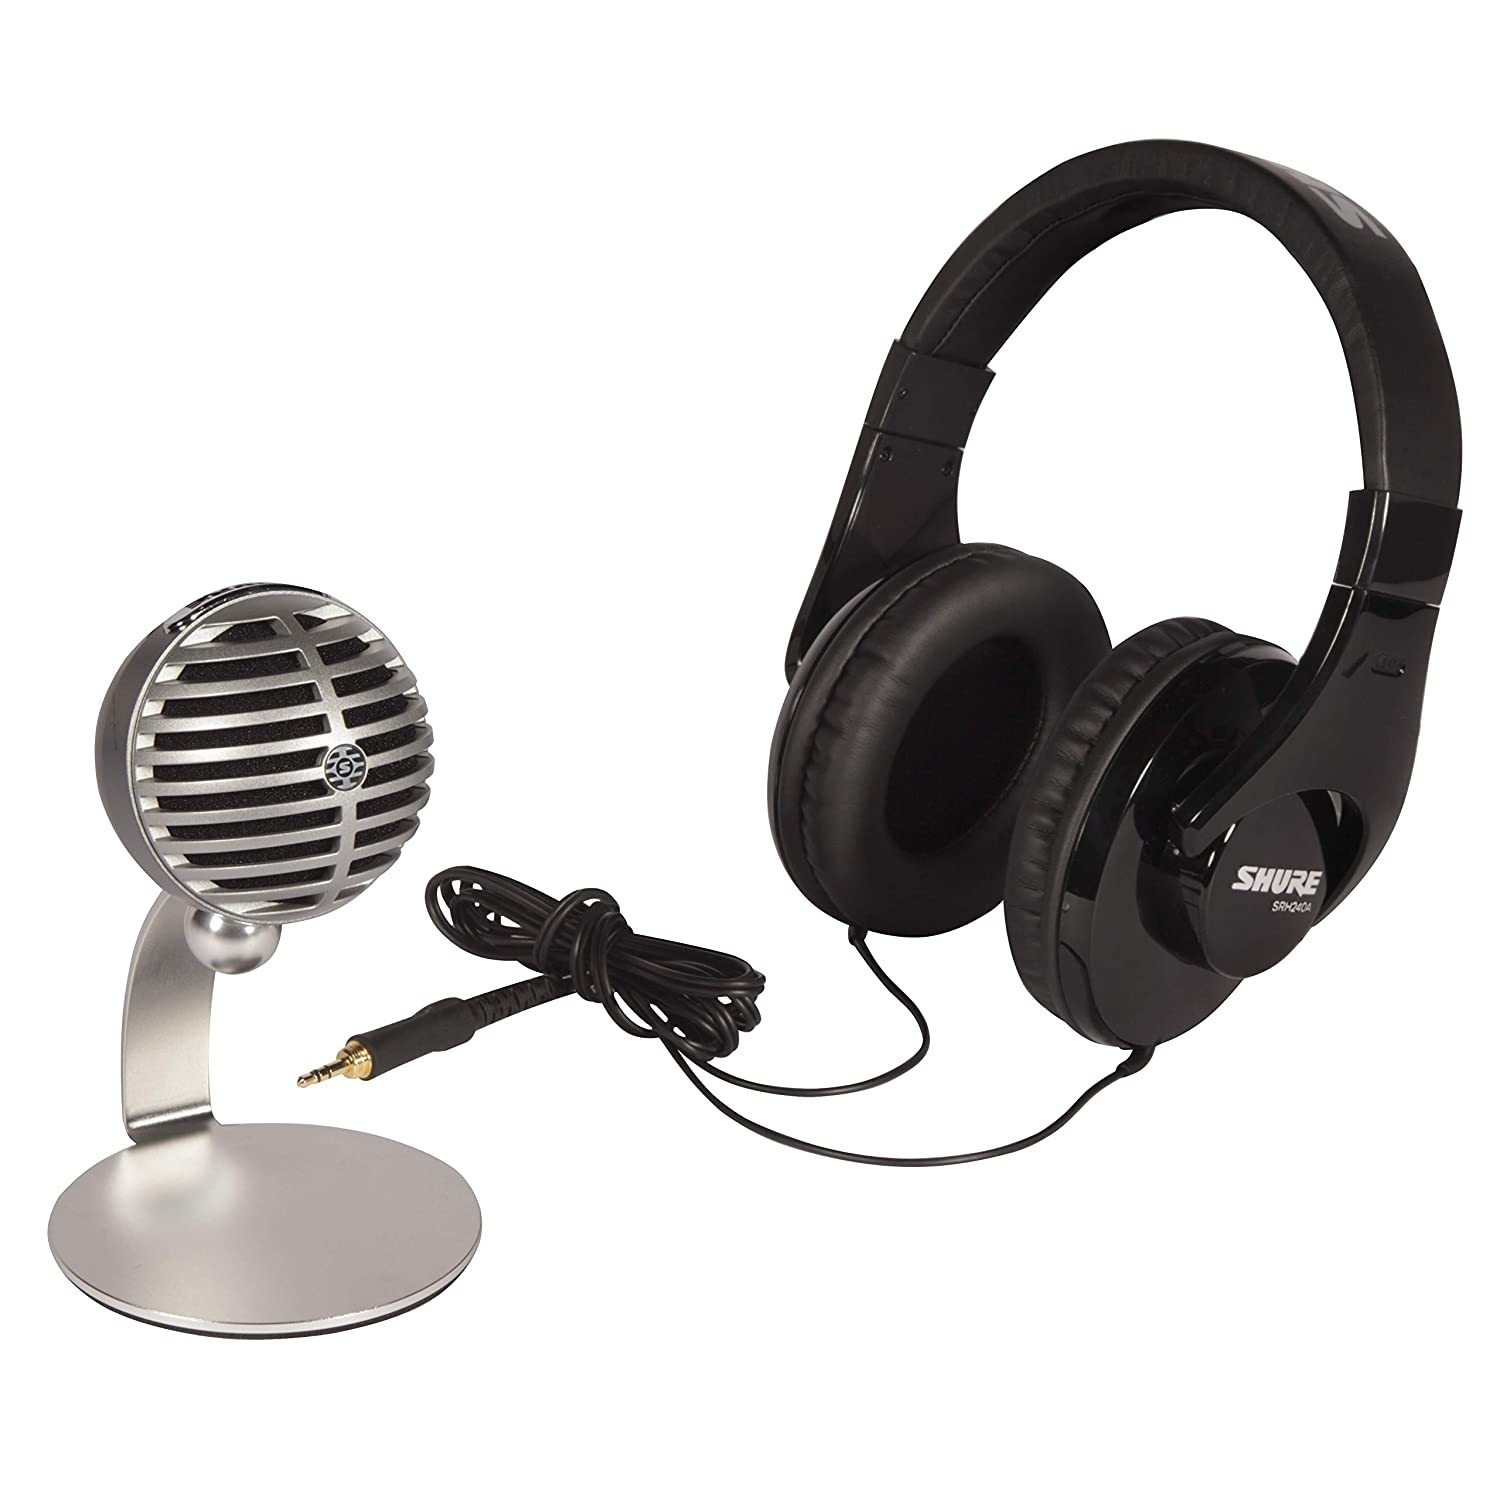 Shure Mobile Recording Kit with SRH240A Headphones and MV5 Microphone Including